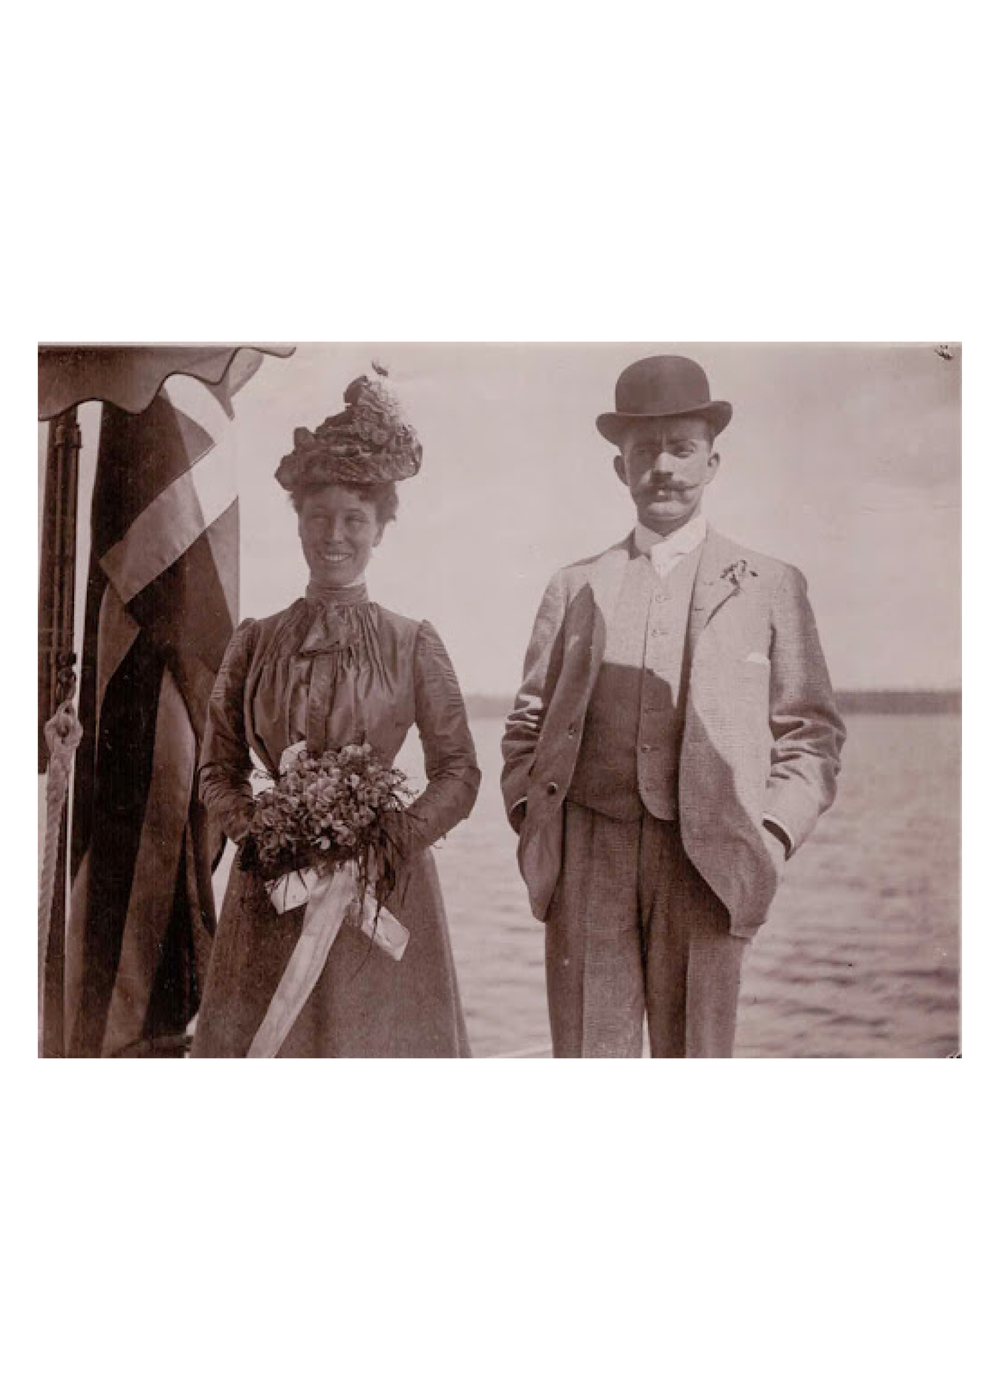 ’Georgie’ Georgina Amelia St. George and Walter Comber on their wedding day, August 1, 1900.